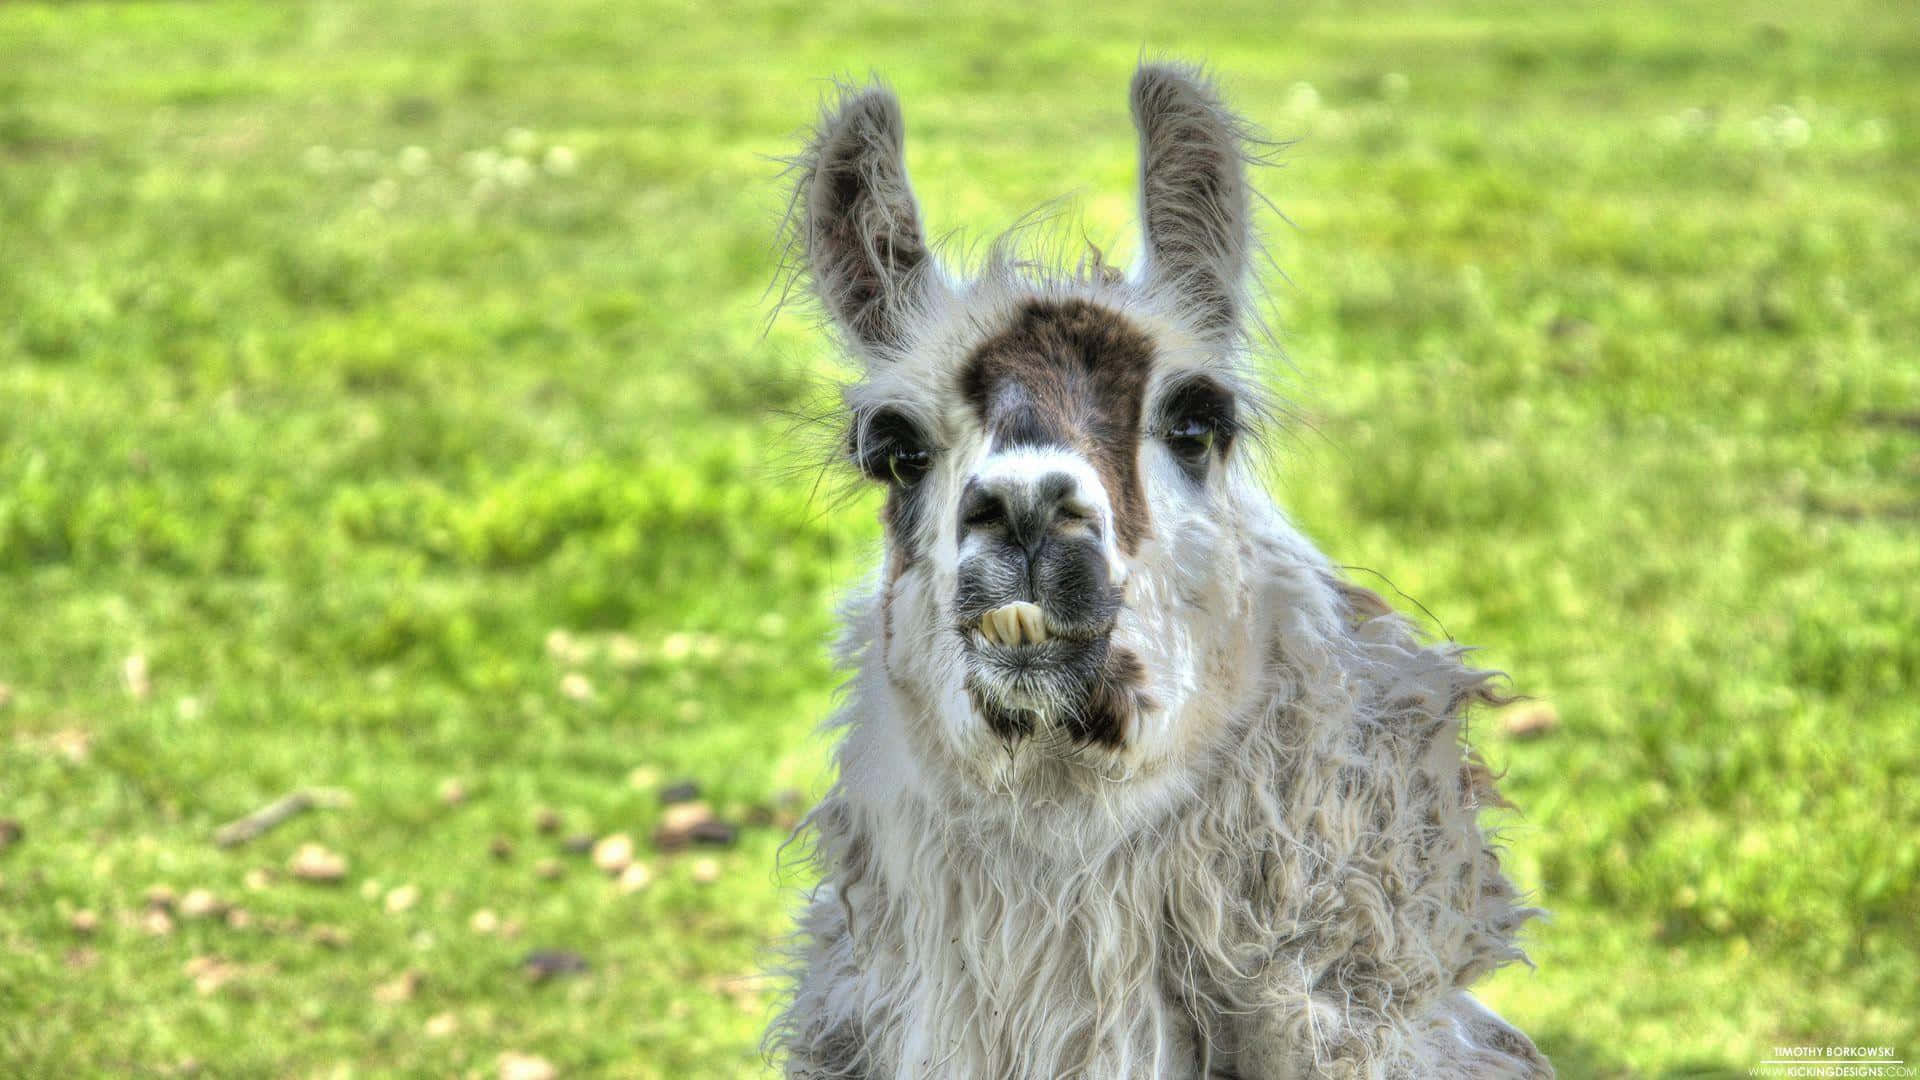 Grey Funny Llama On Grass Picture